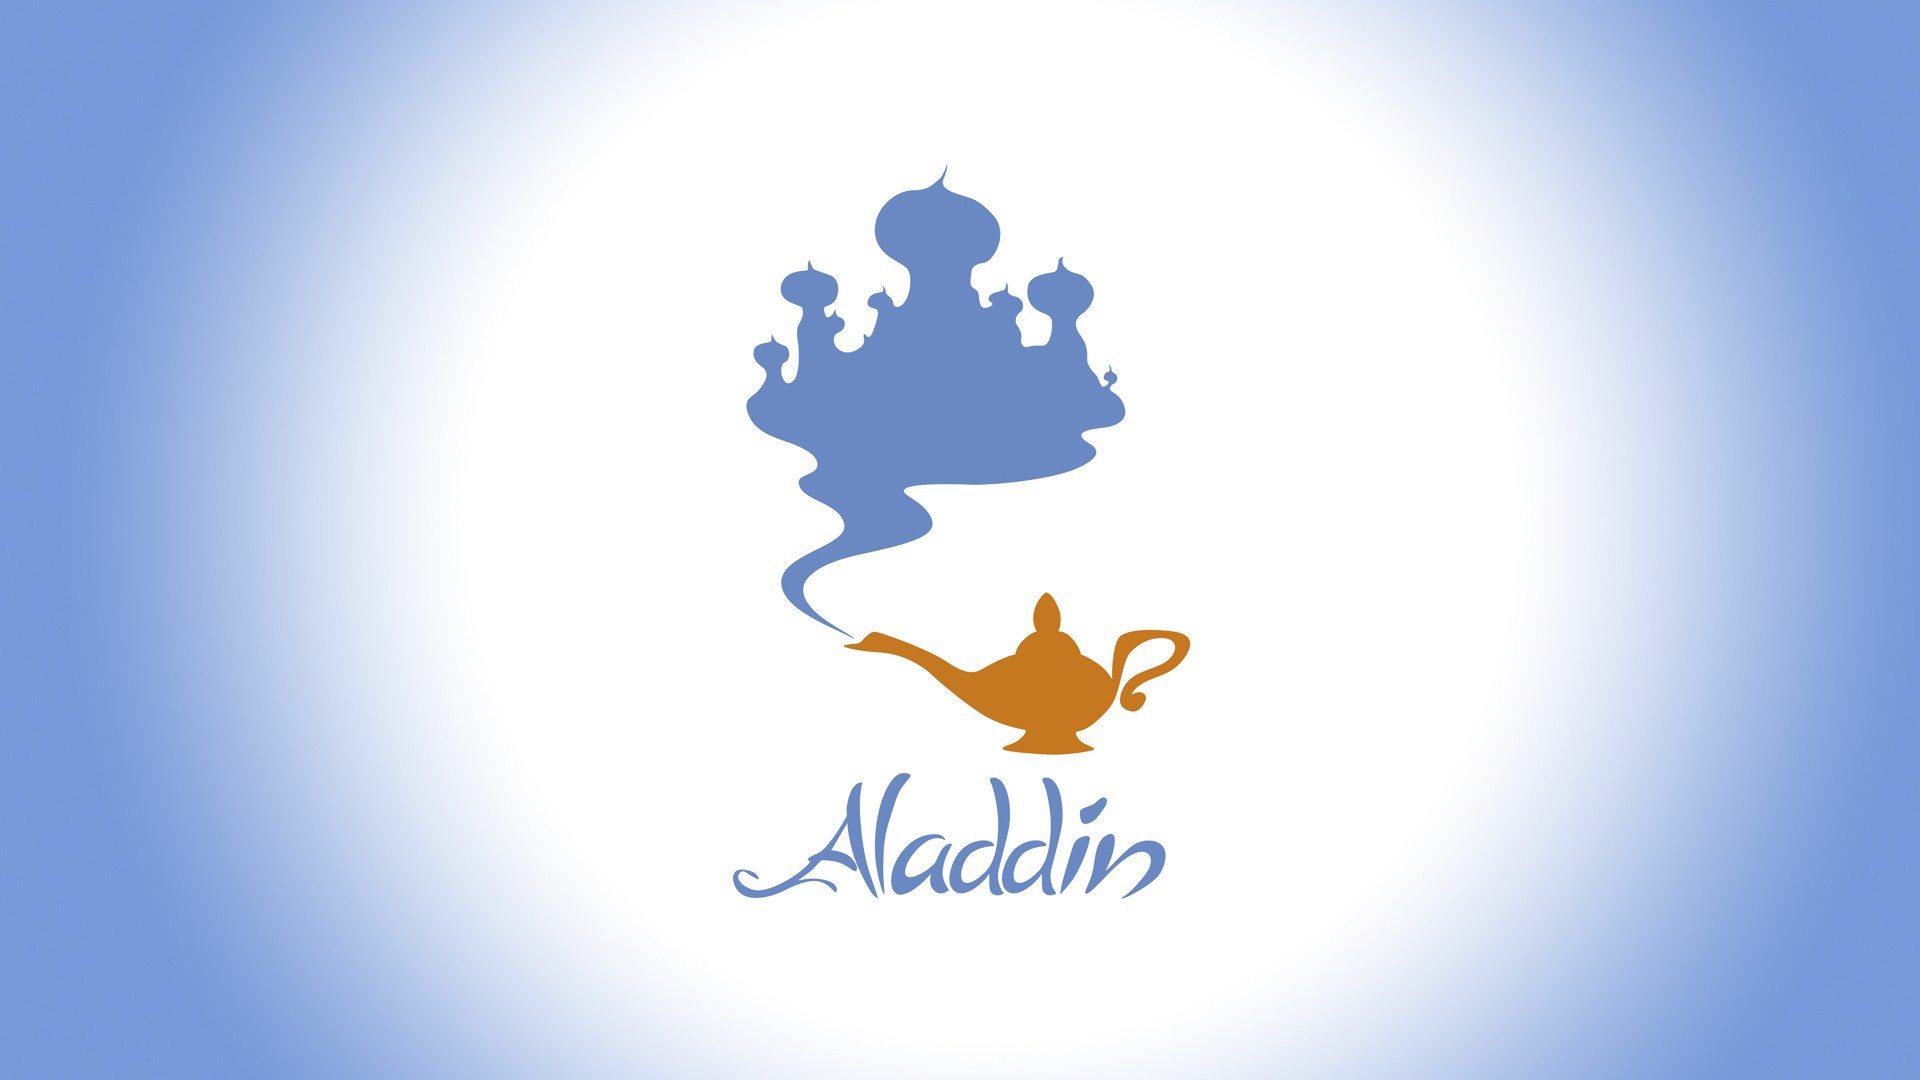 The Film Aladdin Wallpaper And Image Pictures Photos